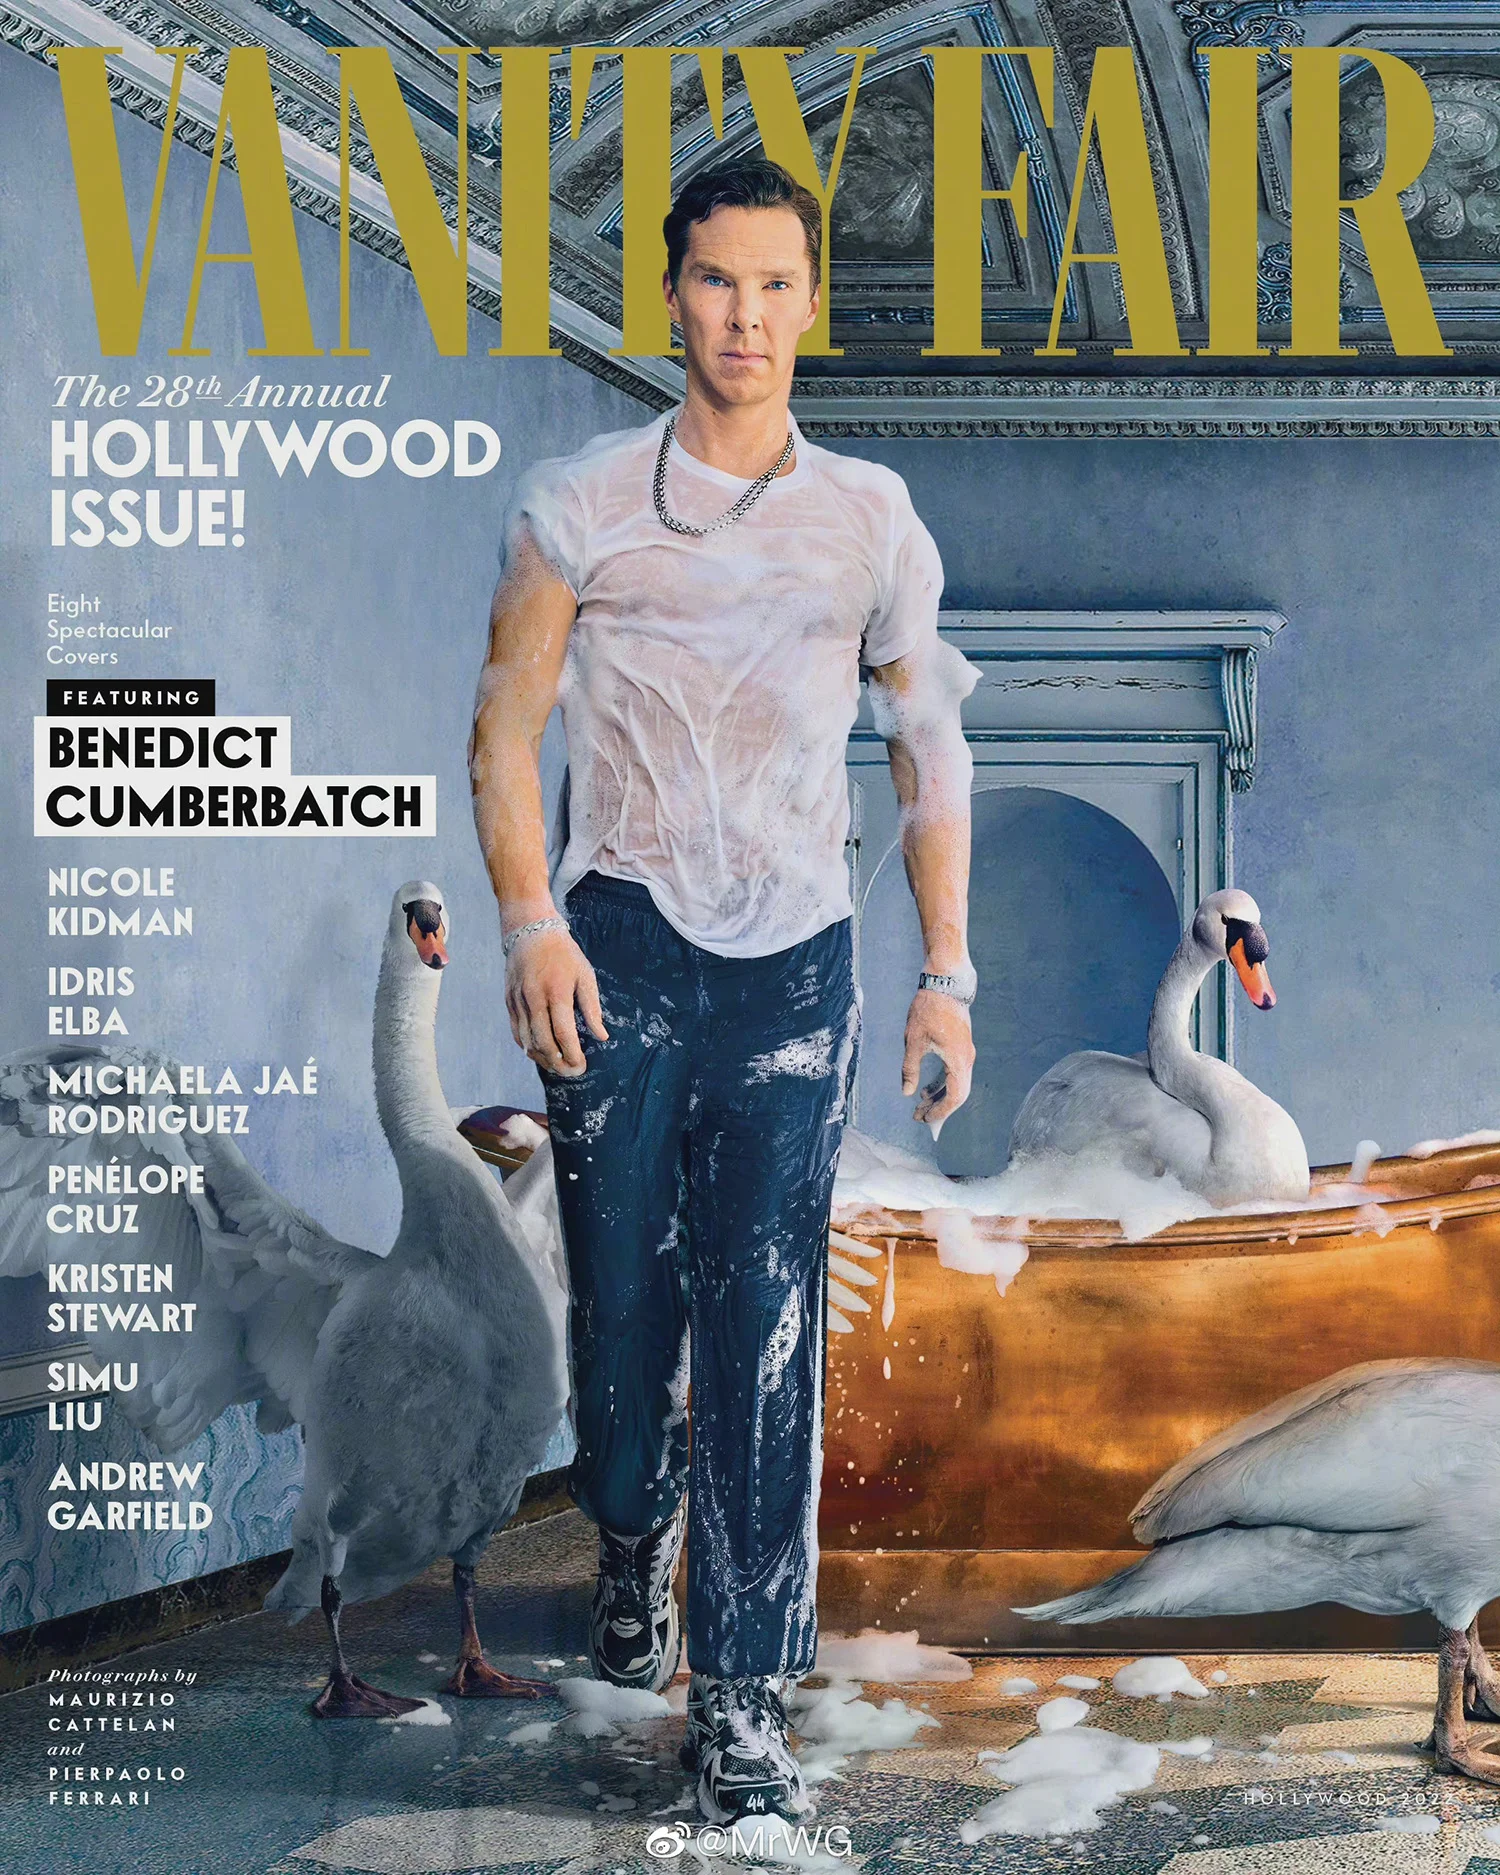 Vanity Fair March 2022 ‘’Hollywood Issue’’ covers by Maurizio Cattelan & Pierpaolo Ferrari